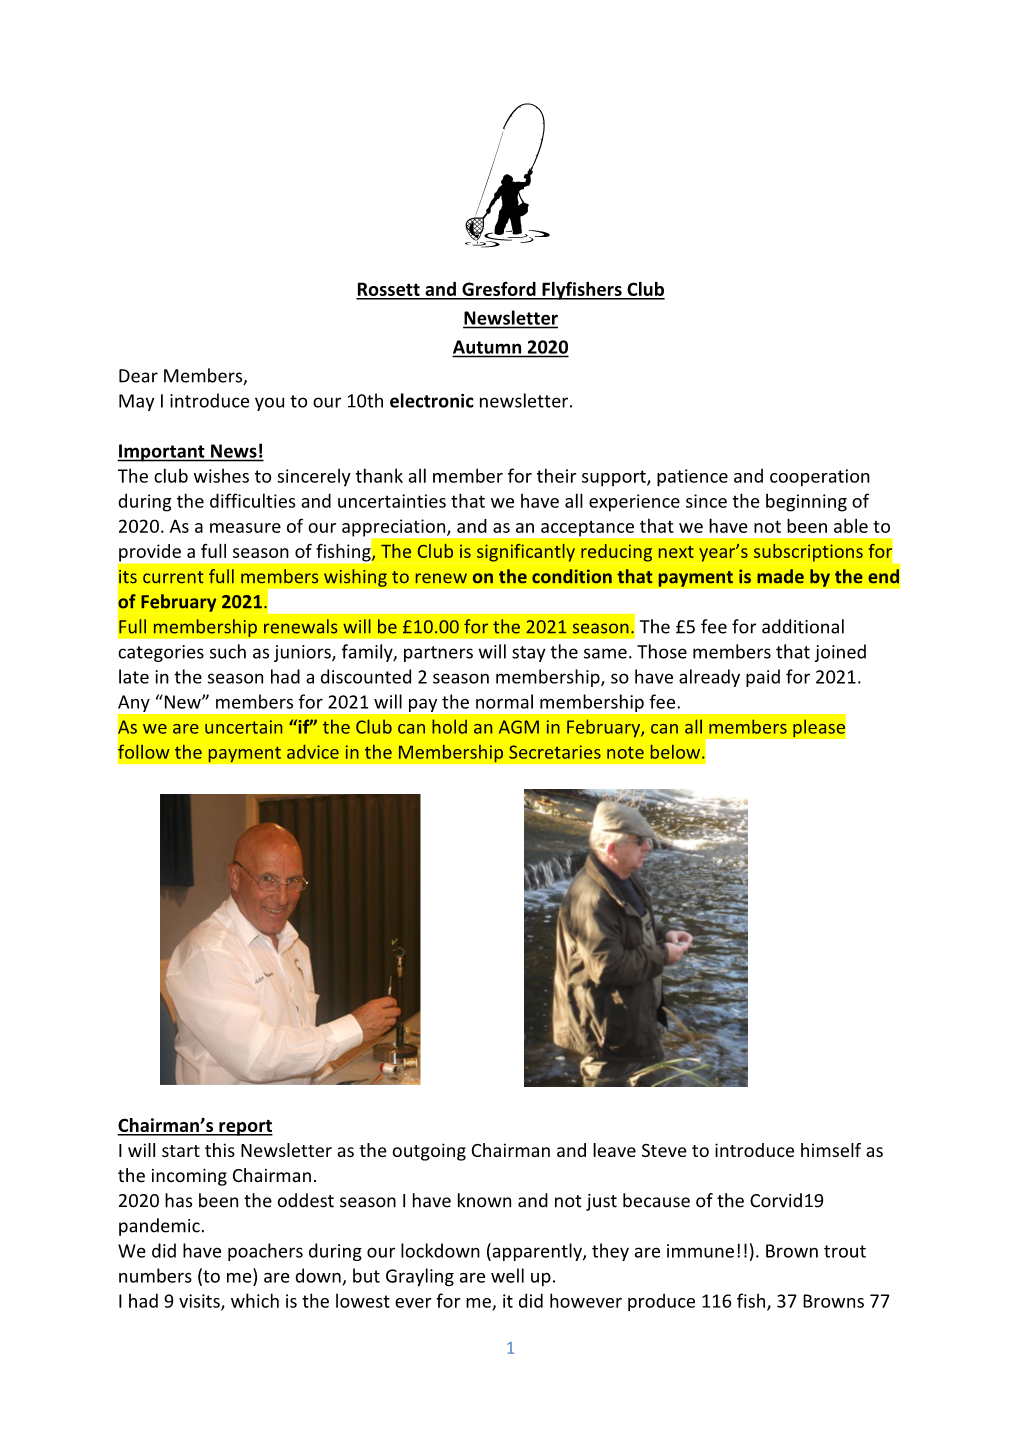 Rossett and Gresford Flyfishers Club Newsletter Autumn 2020 Dear Members, May I Introduce You to Our 10Th Electronic Newsletter